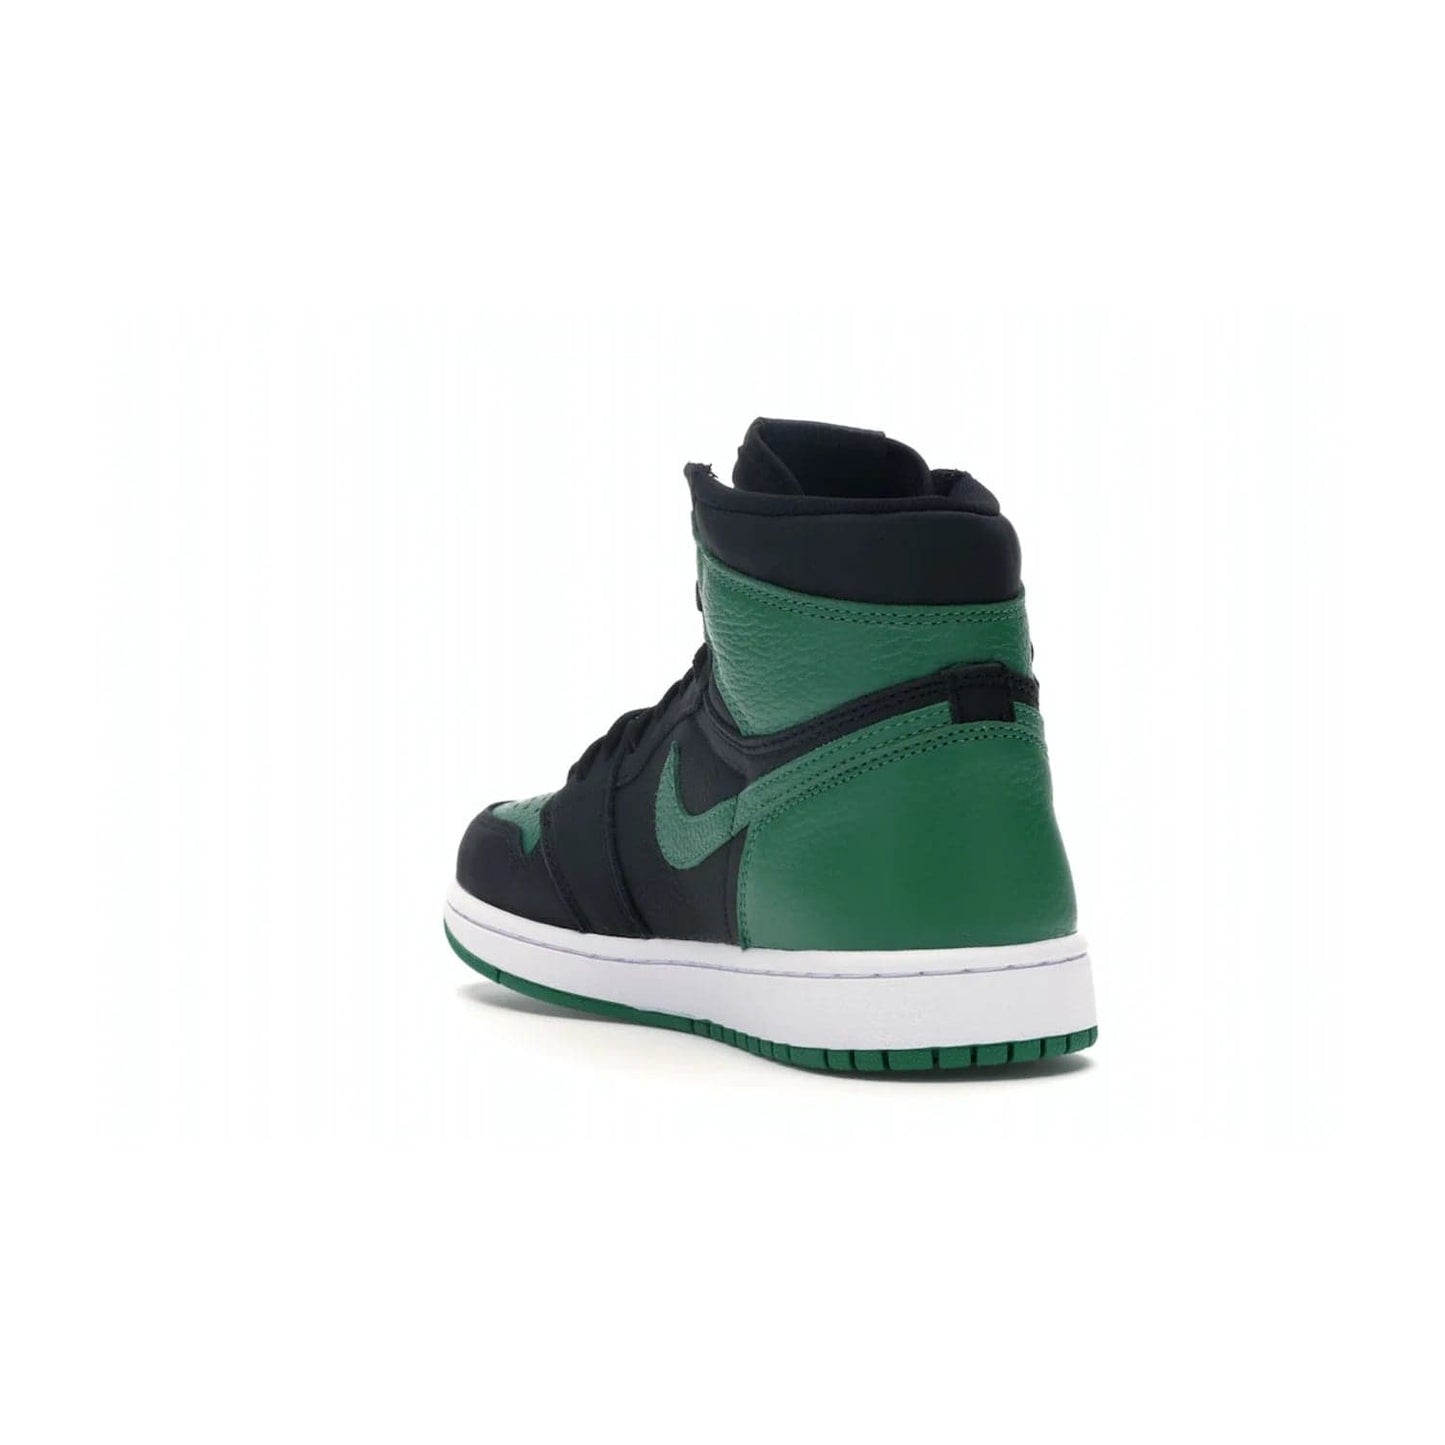 Jordan 1 Retro High Pine Green Black - Image 25 - Only at www.BallersClubKickz.com - Step into fresh style with the Jordan 1 Retro High Pine Green Black. Combining a black tumbled leather upper with green leather overlays, this sneaker features a Gym Red embroidered tongue tag, sail midsole, and pine green outsole for iconic style with a unique twist.